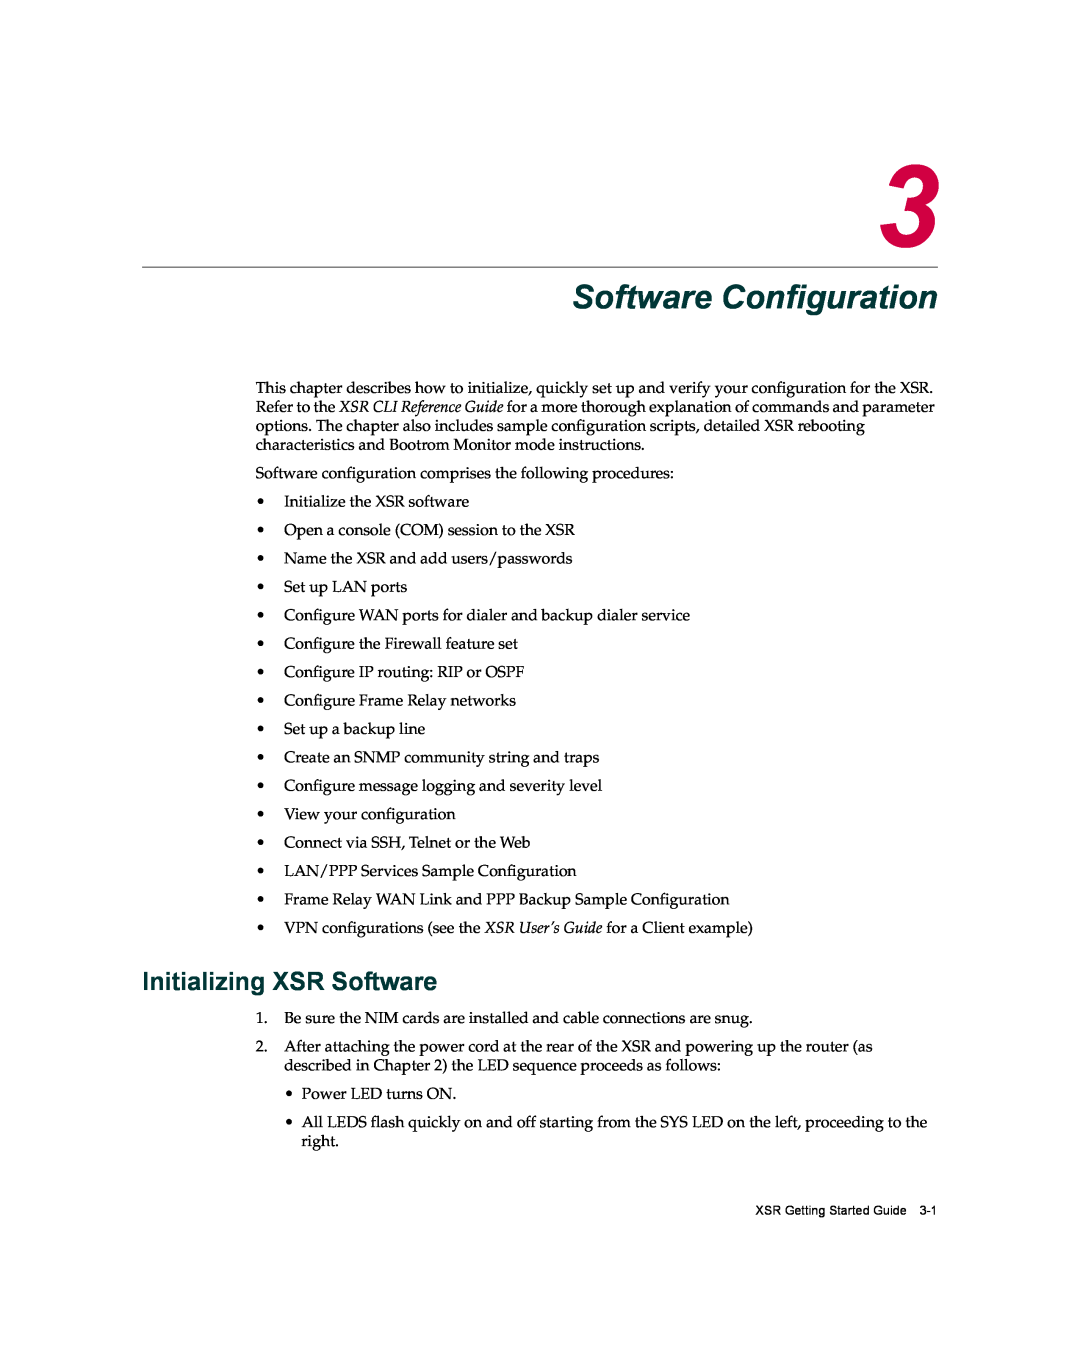 Enterasys Networks XSR-3020 manual Software Configuration, Initializing XSR Software 